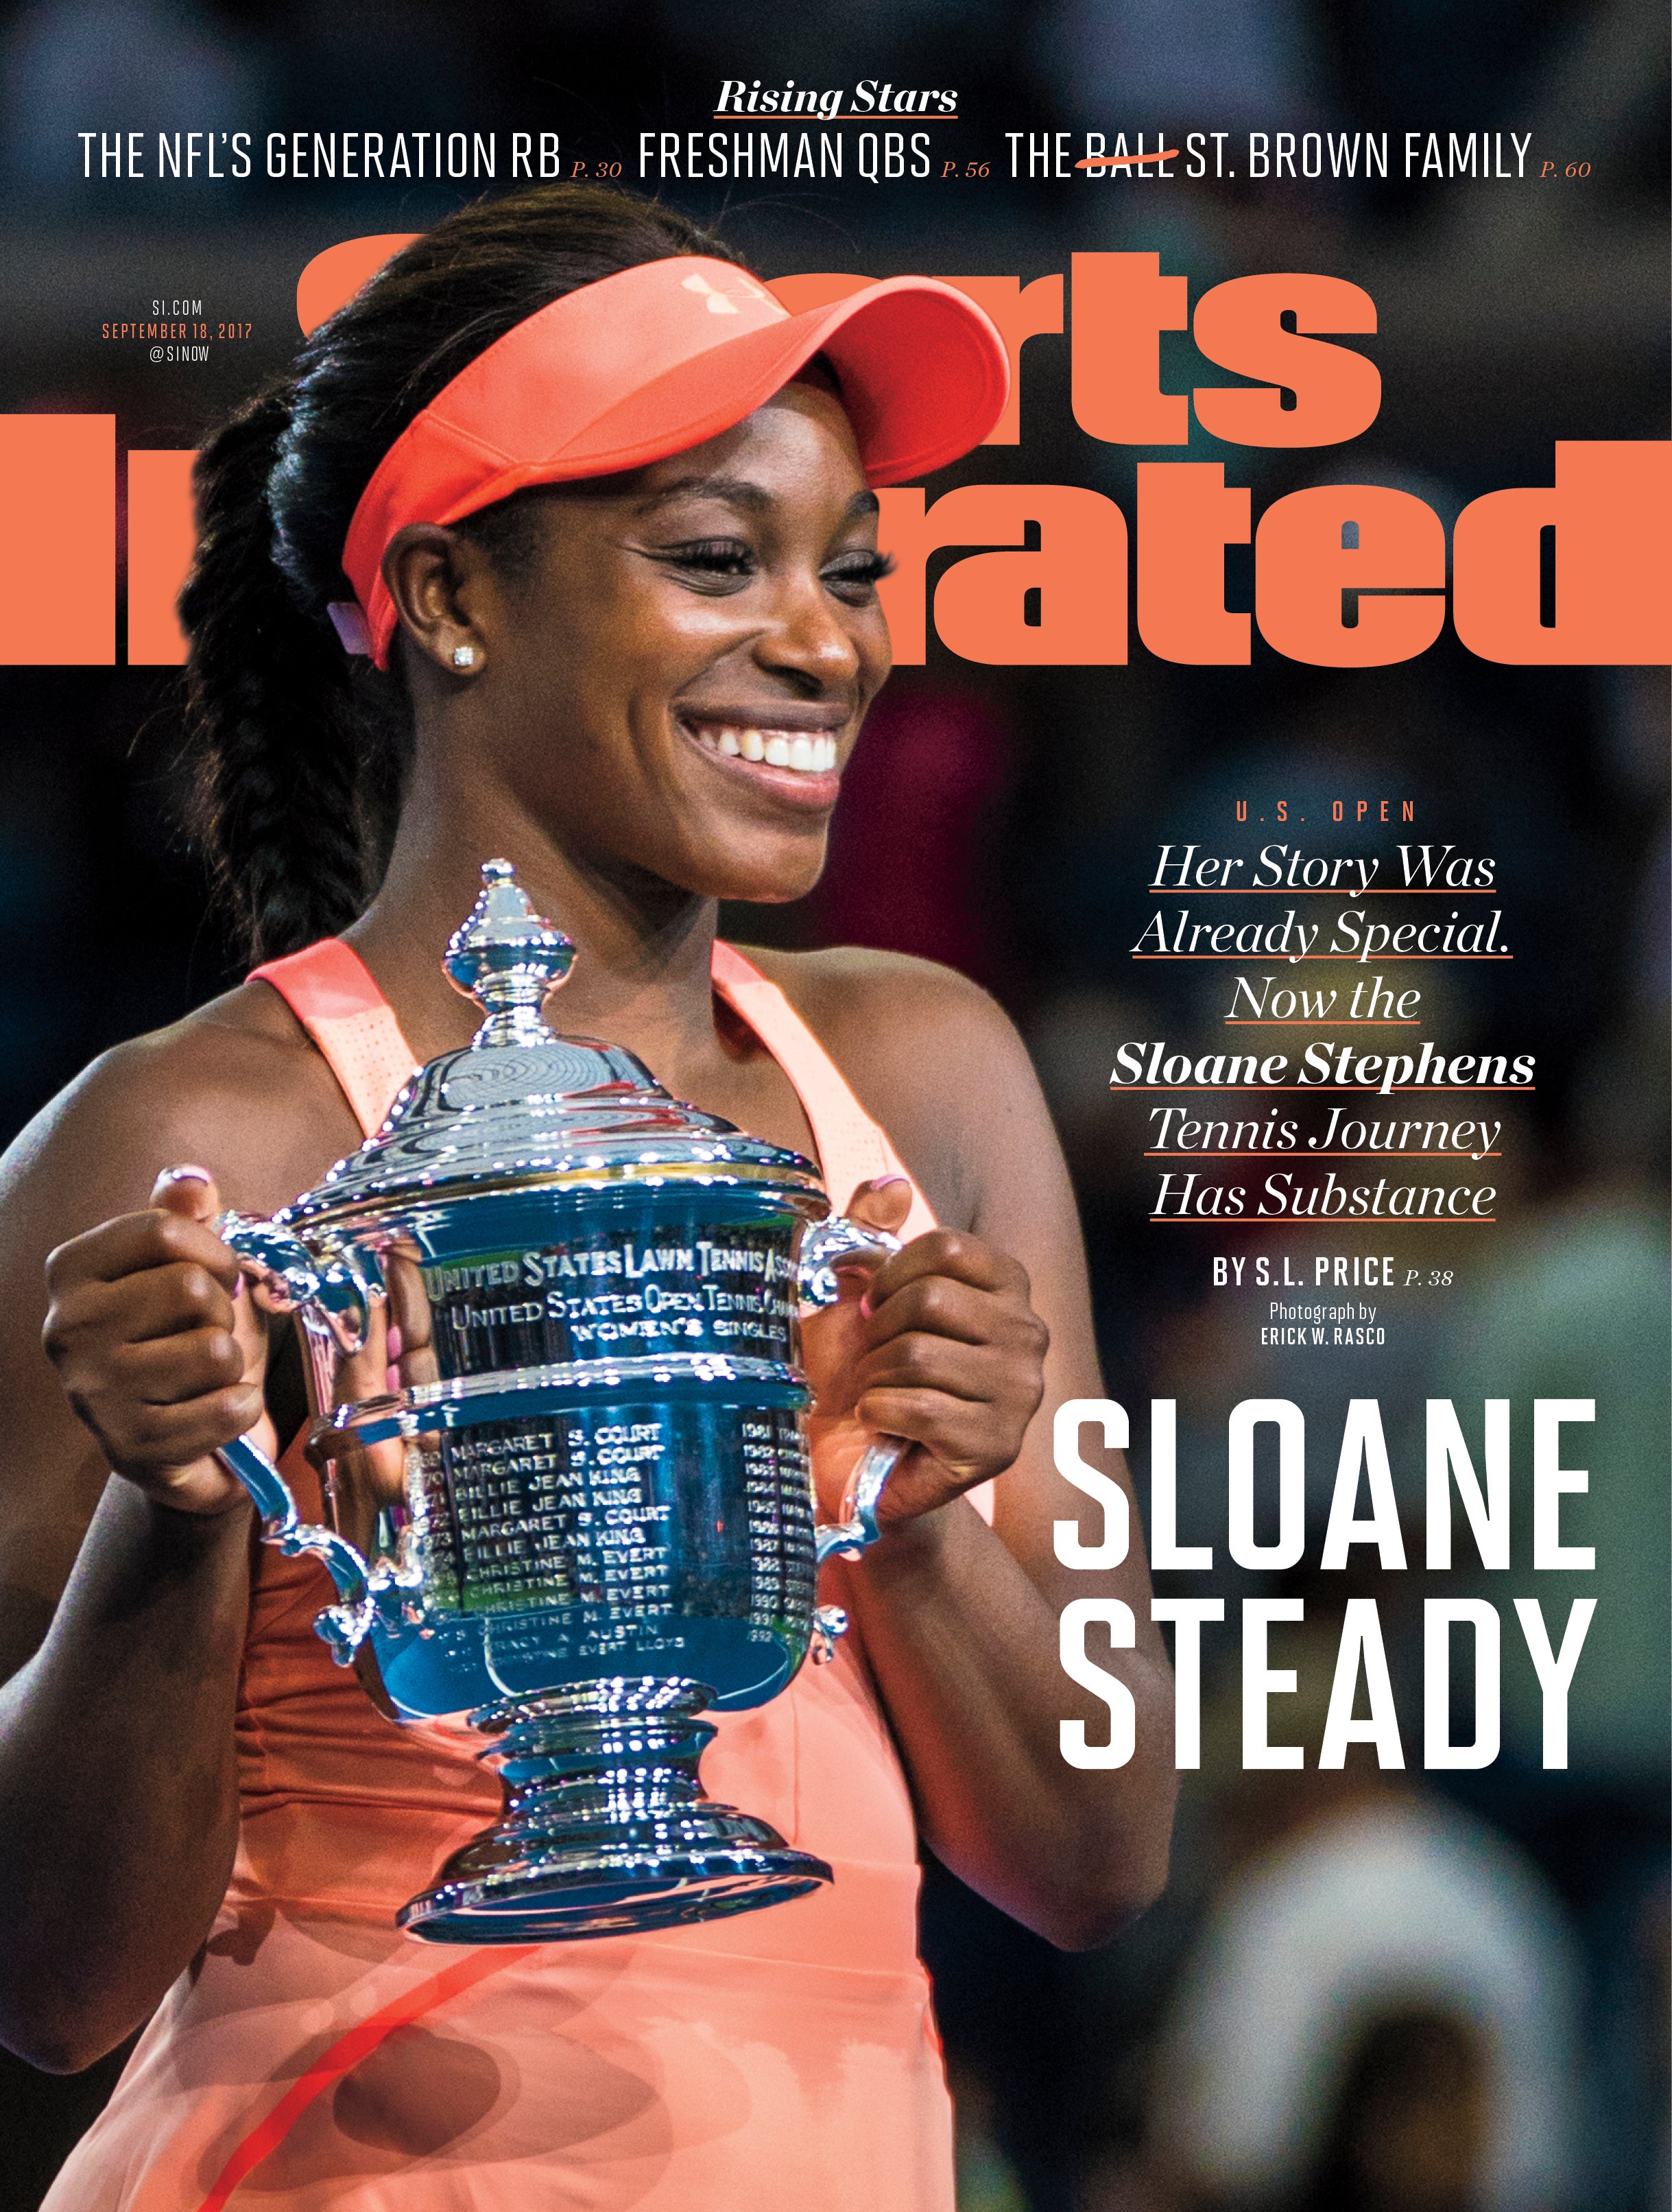 Tennis Star Sloane Stephens Celebrates US Open Win With 'Sports Illustrated' Cover
